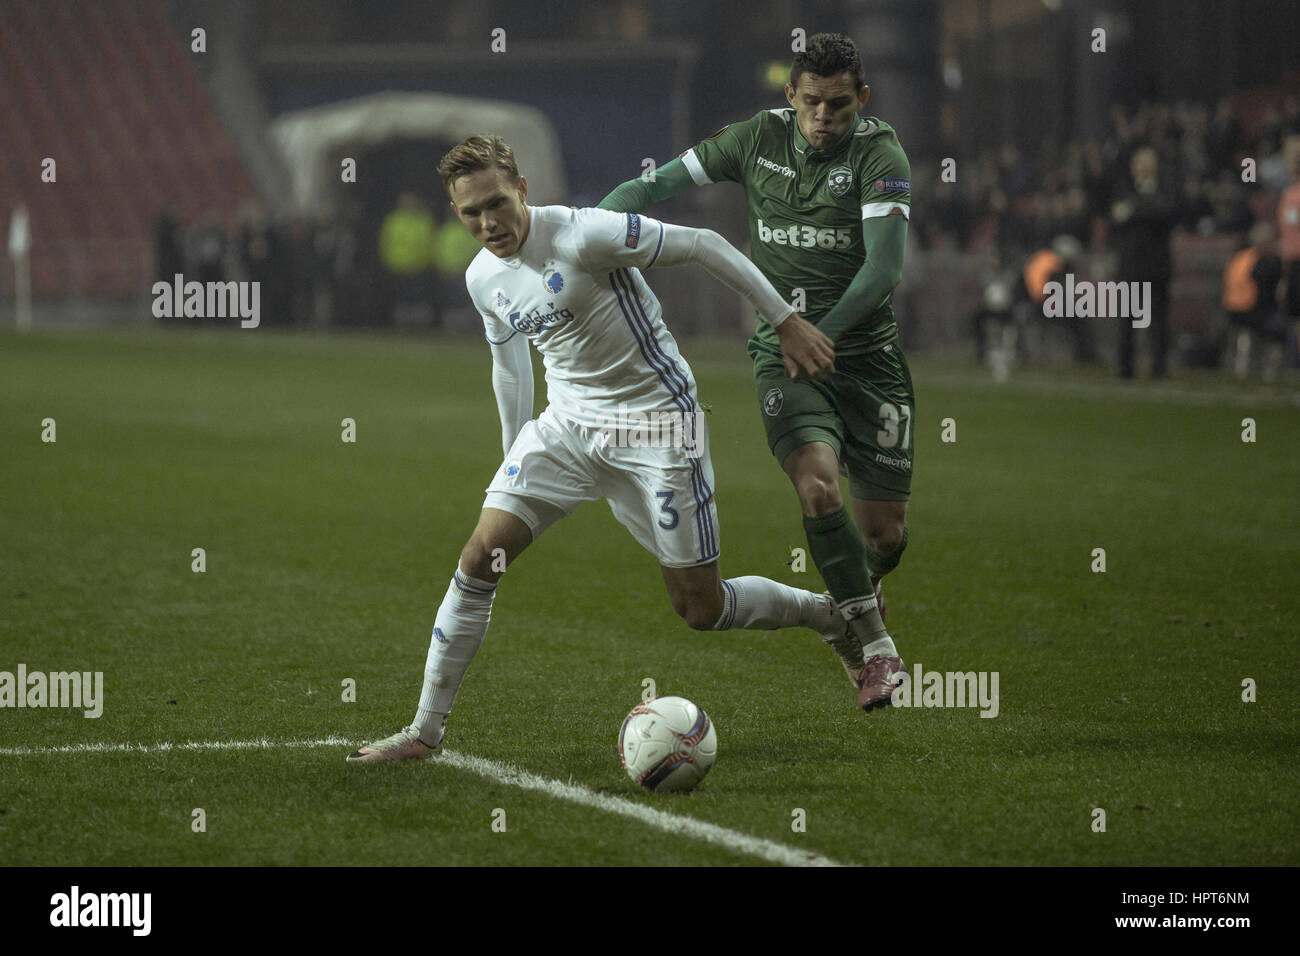 Copenhagen, Denmark. 23rd Feb, 2017. Ludwig Augustinsson (3) of FC Copenhagen marks the ball in front of Joao Paulo (37) during the Europa League round of 32 match between FC Copenhagen and Ludogorets Razgrad at Telia Parken. Credit: Gonzales Photo/Alamy Live News Stock Photo